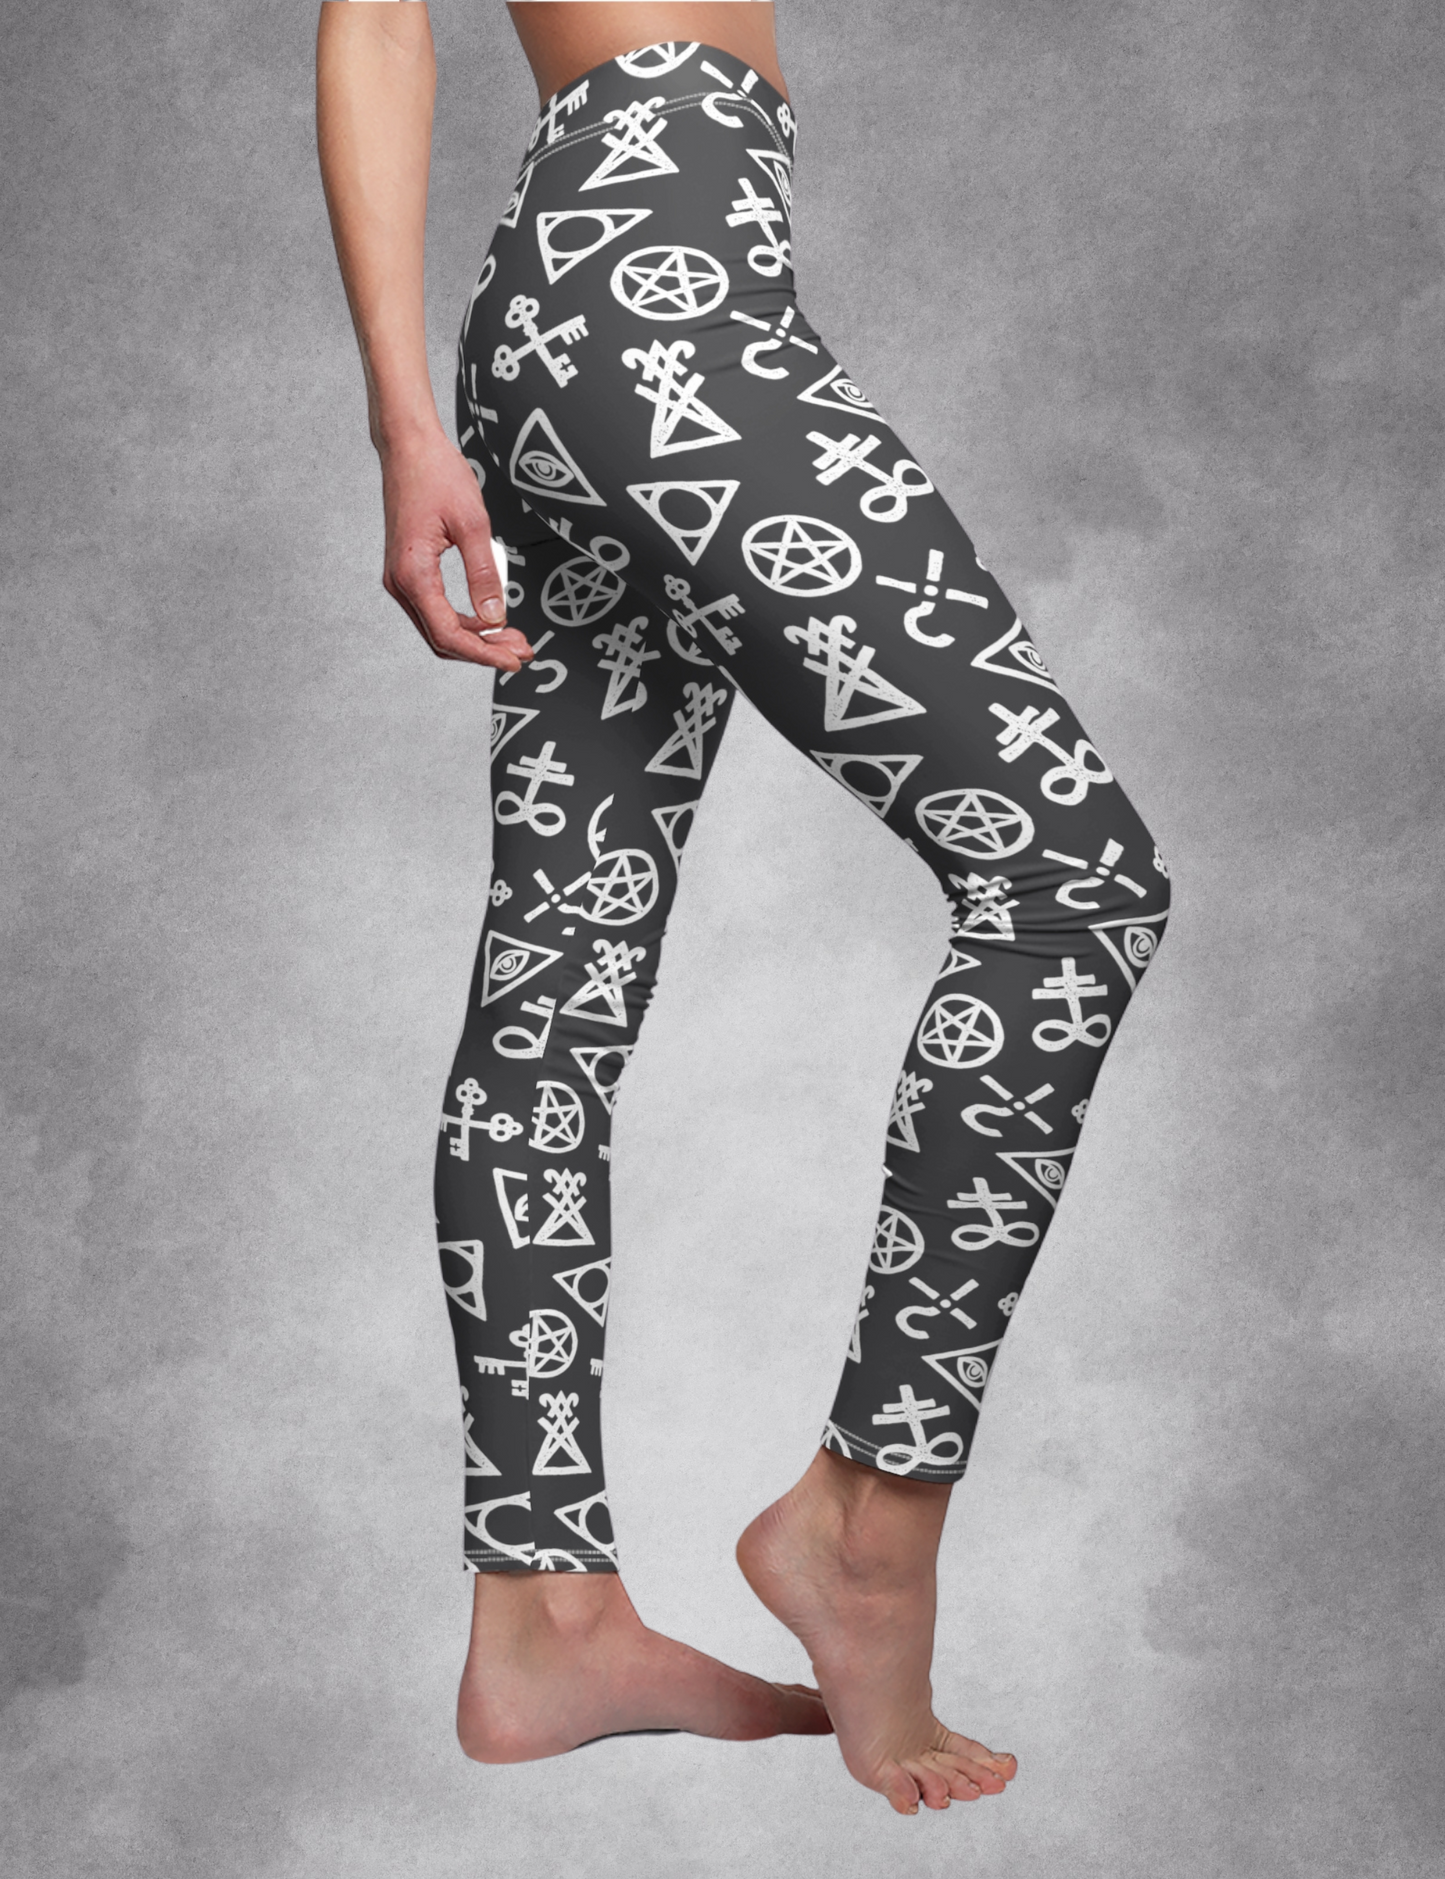 Occult Symbols Plus Size Witchy Clothing Leggings